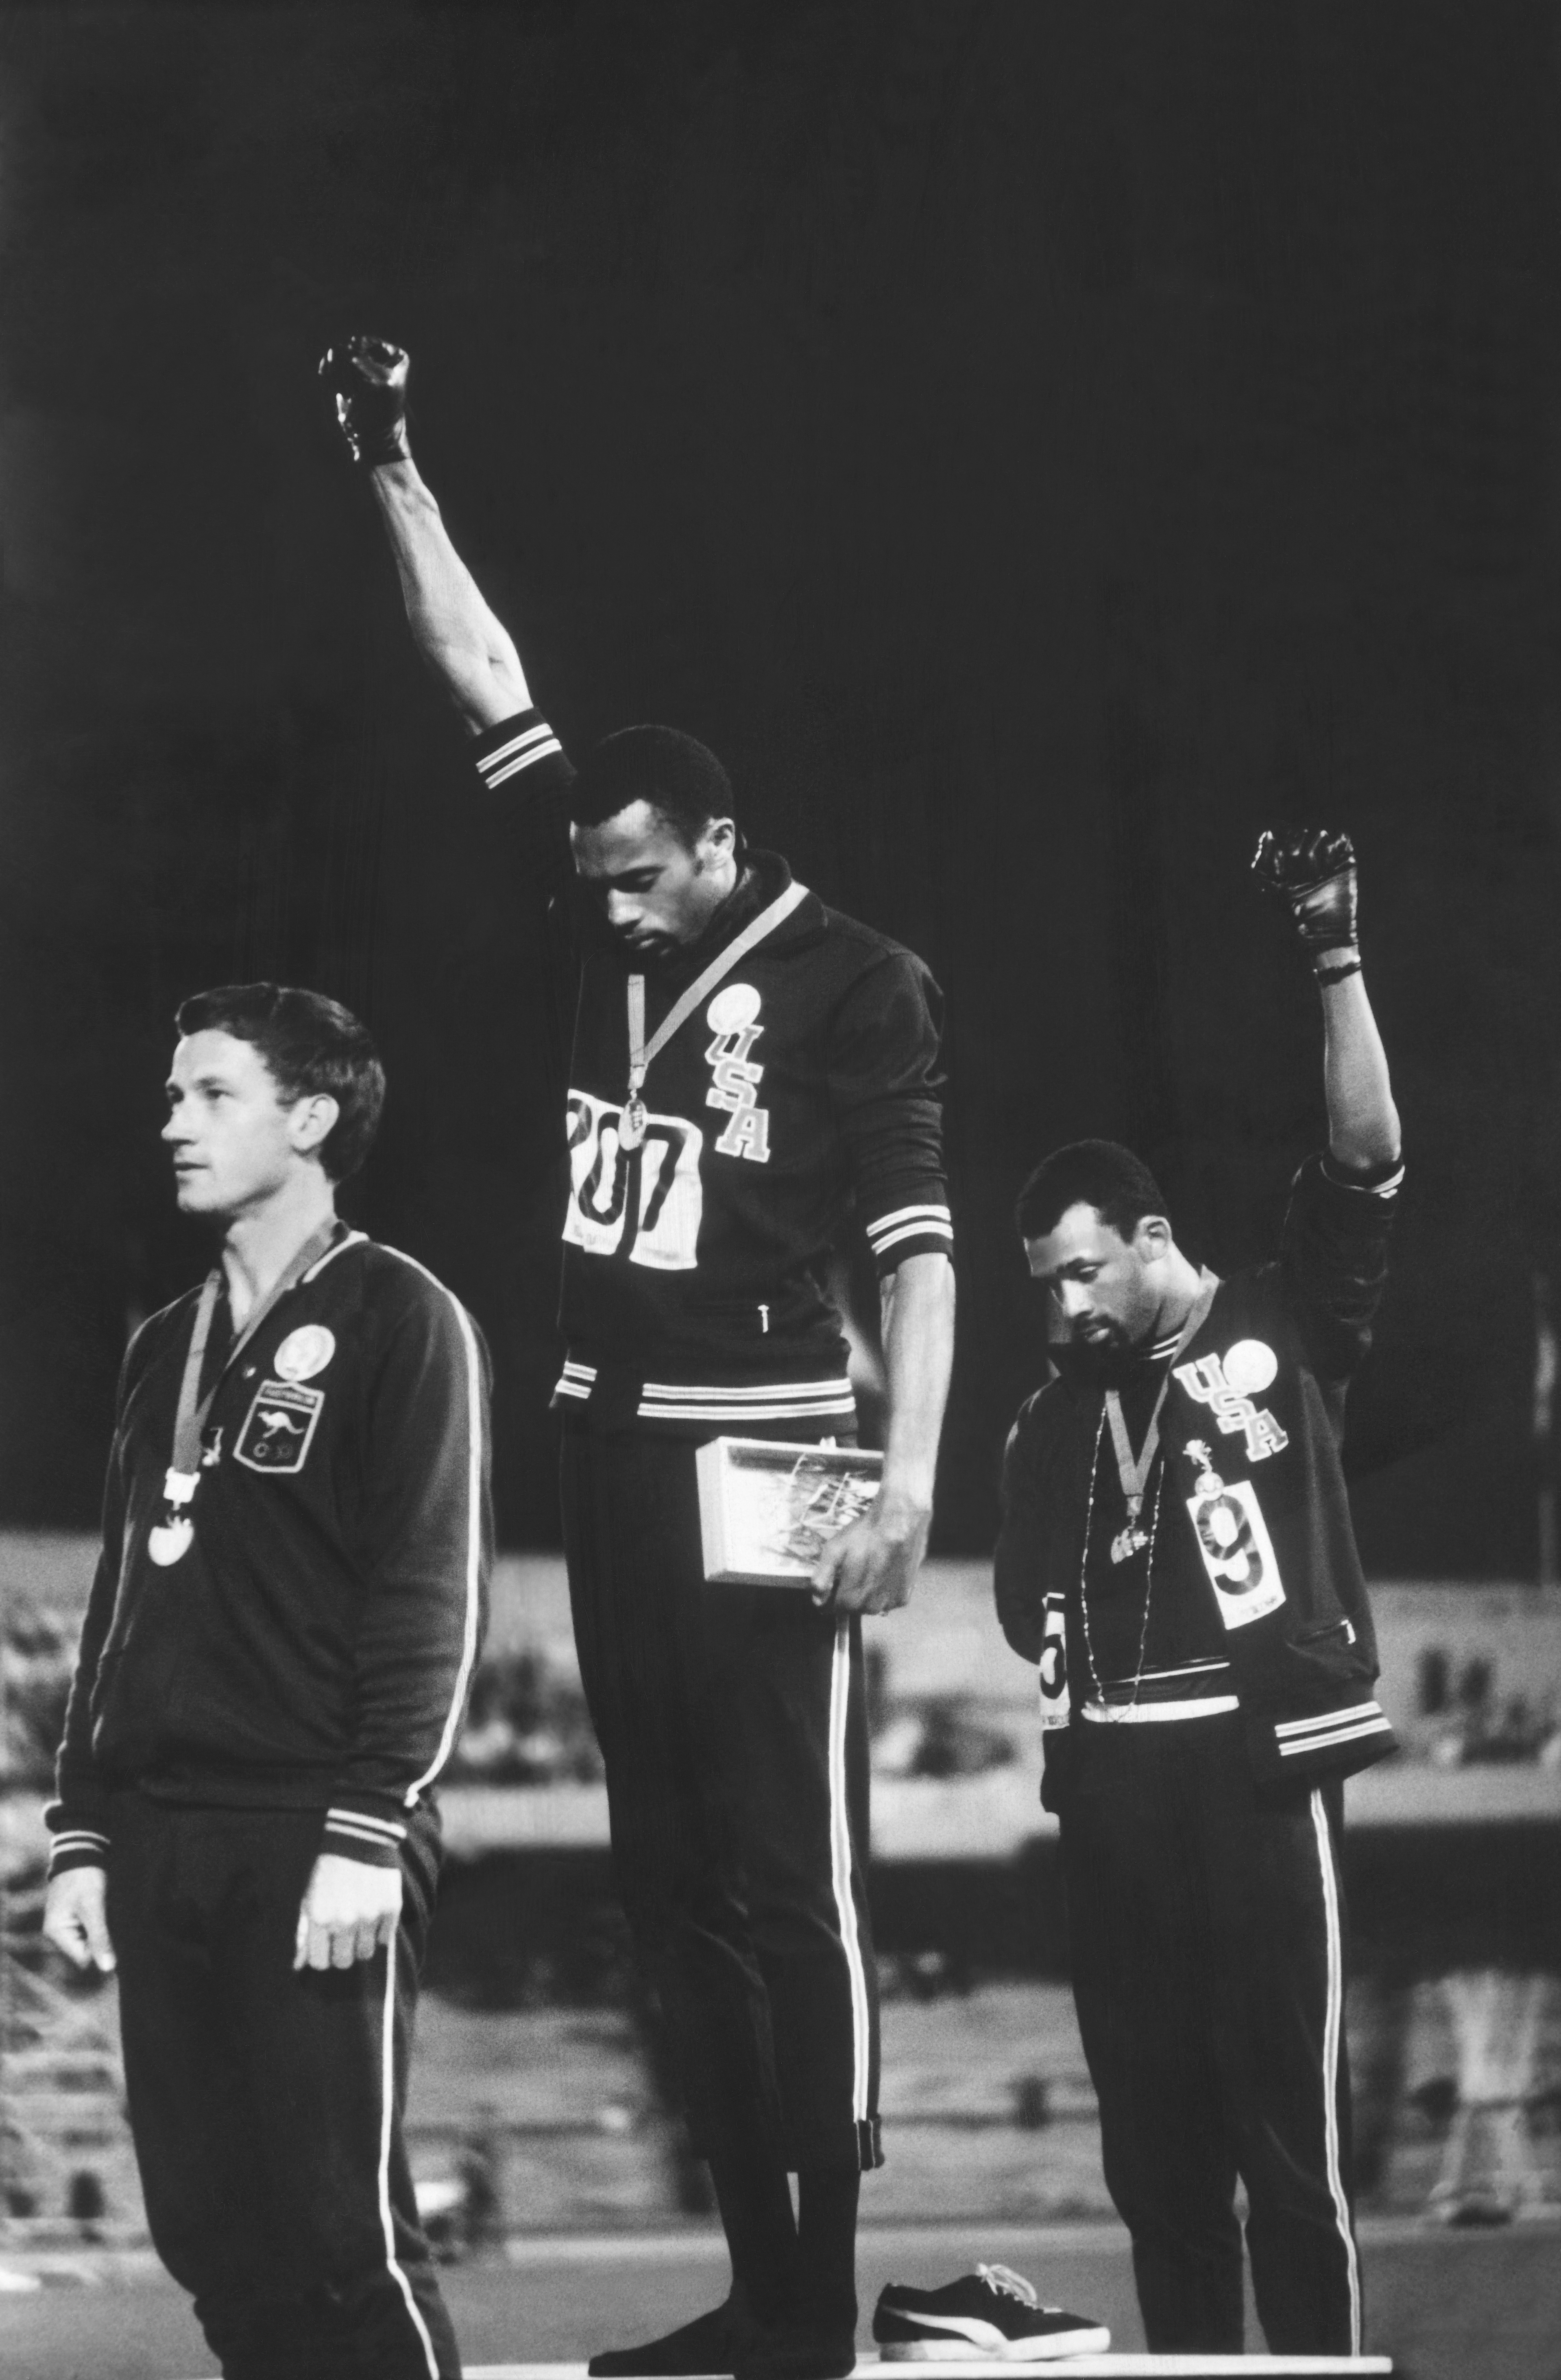 American track and field athletes Tommie Smith (C) and John Carlos (R), first and third place winners in the 200-meter race, protest with the Black Power salute as they stand on the winner's podium at the Summer Olympic games in Mexico City on October 19, 1968. (John Dominis/The LIFE Picture Collection—Getty Images)